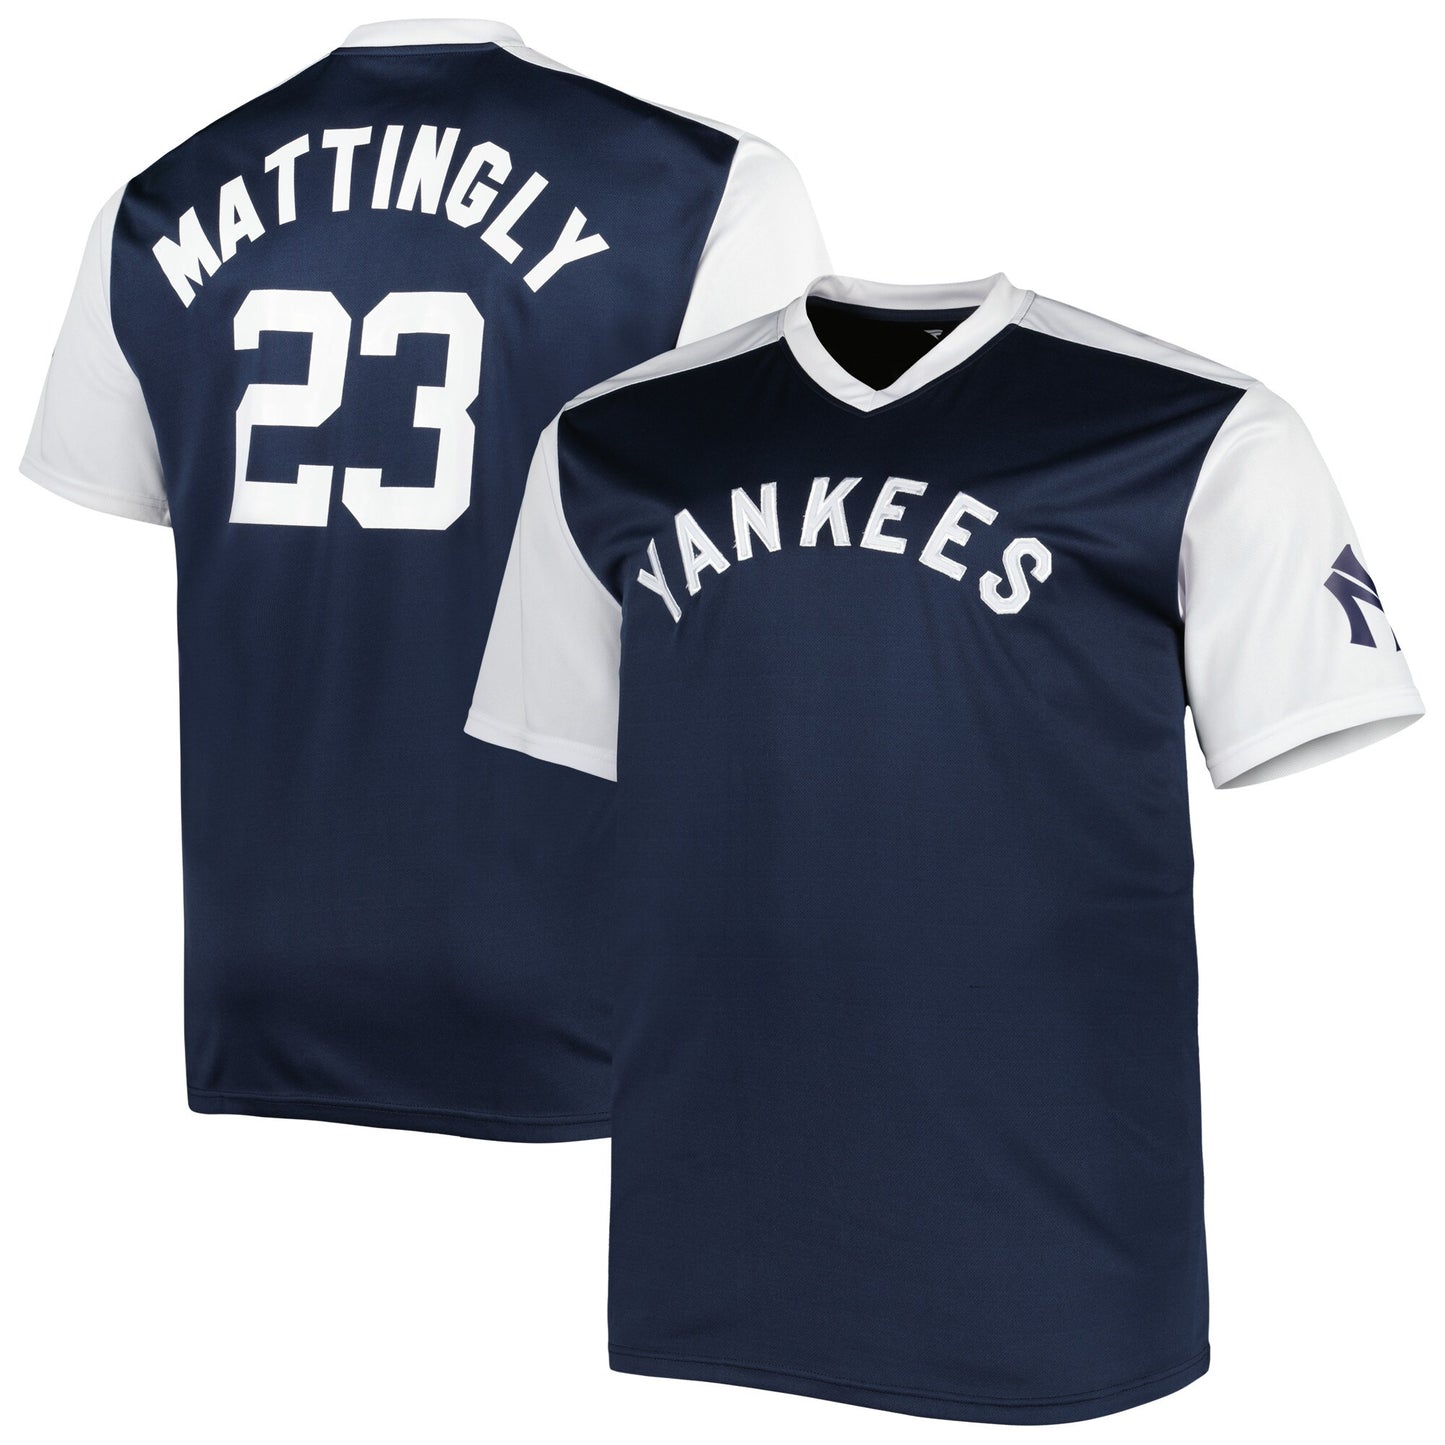 Don Mattingly New York Yankees Cooperstown Collection Replica Player Jersey - Navy/White